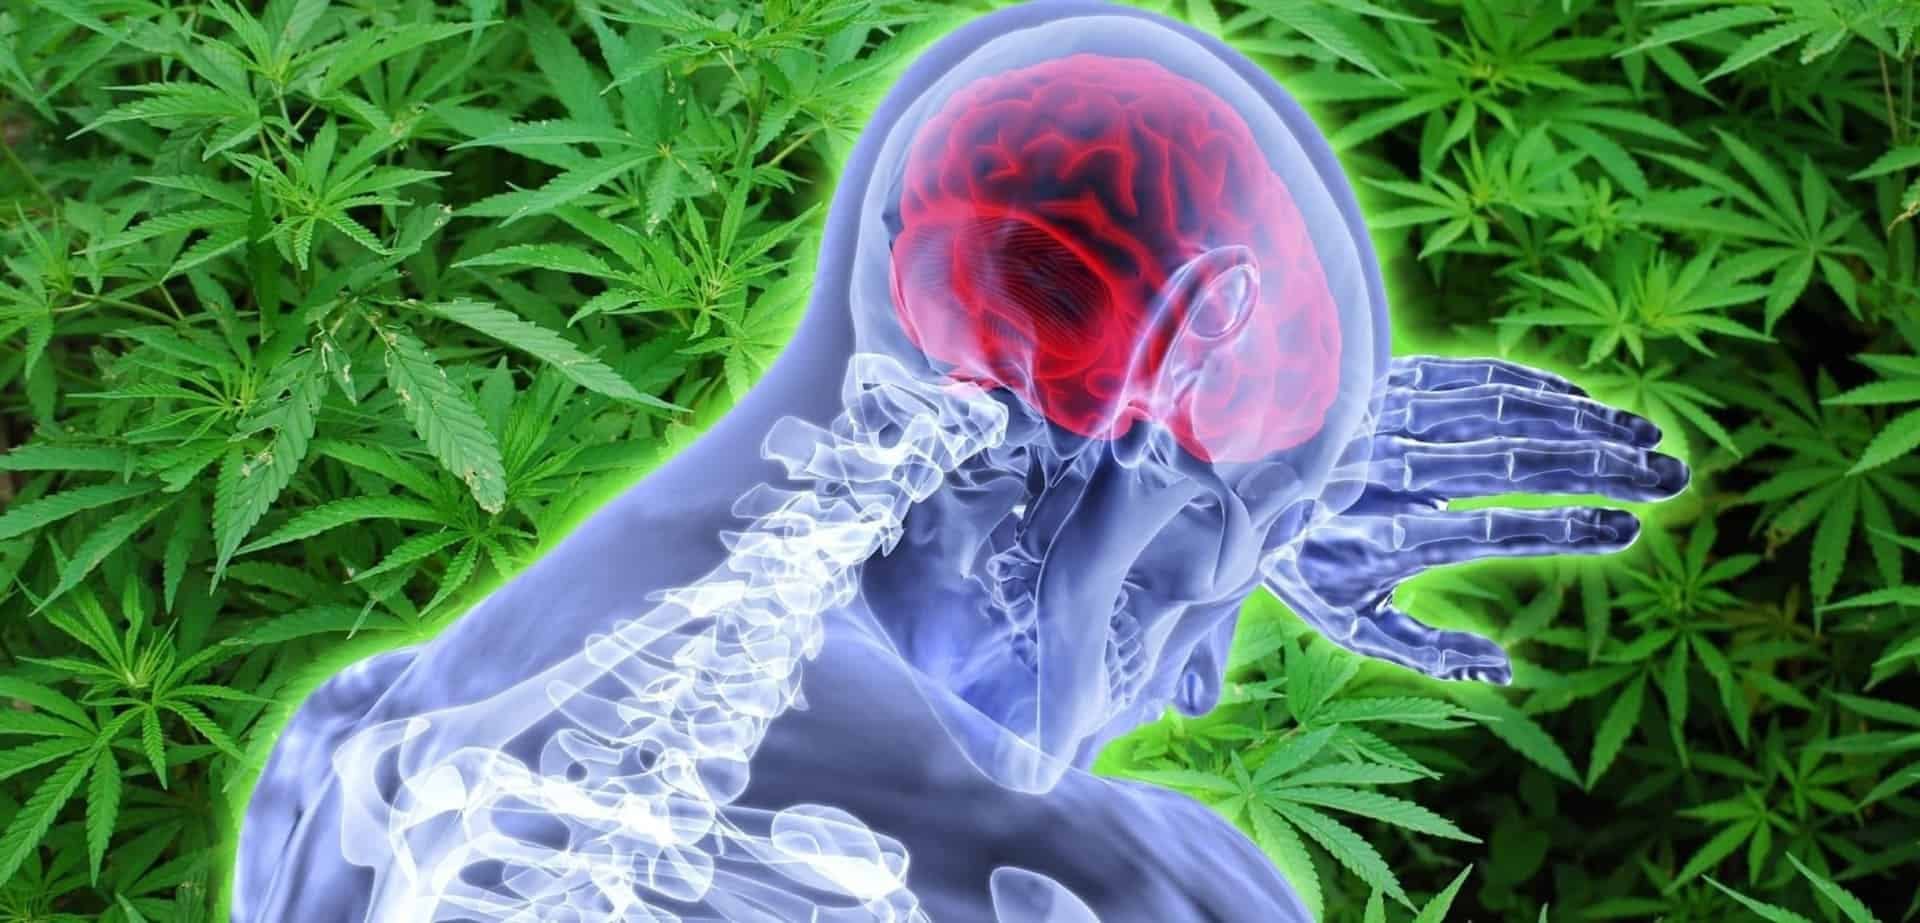 x ray image of human brain with cannabis background